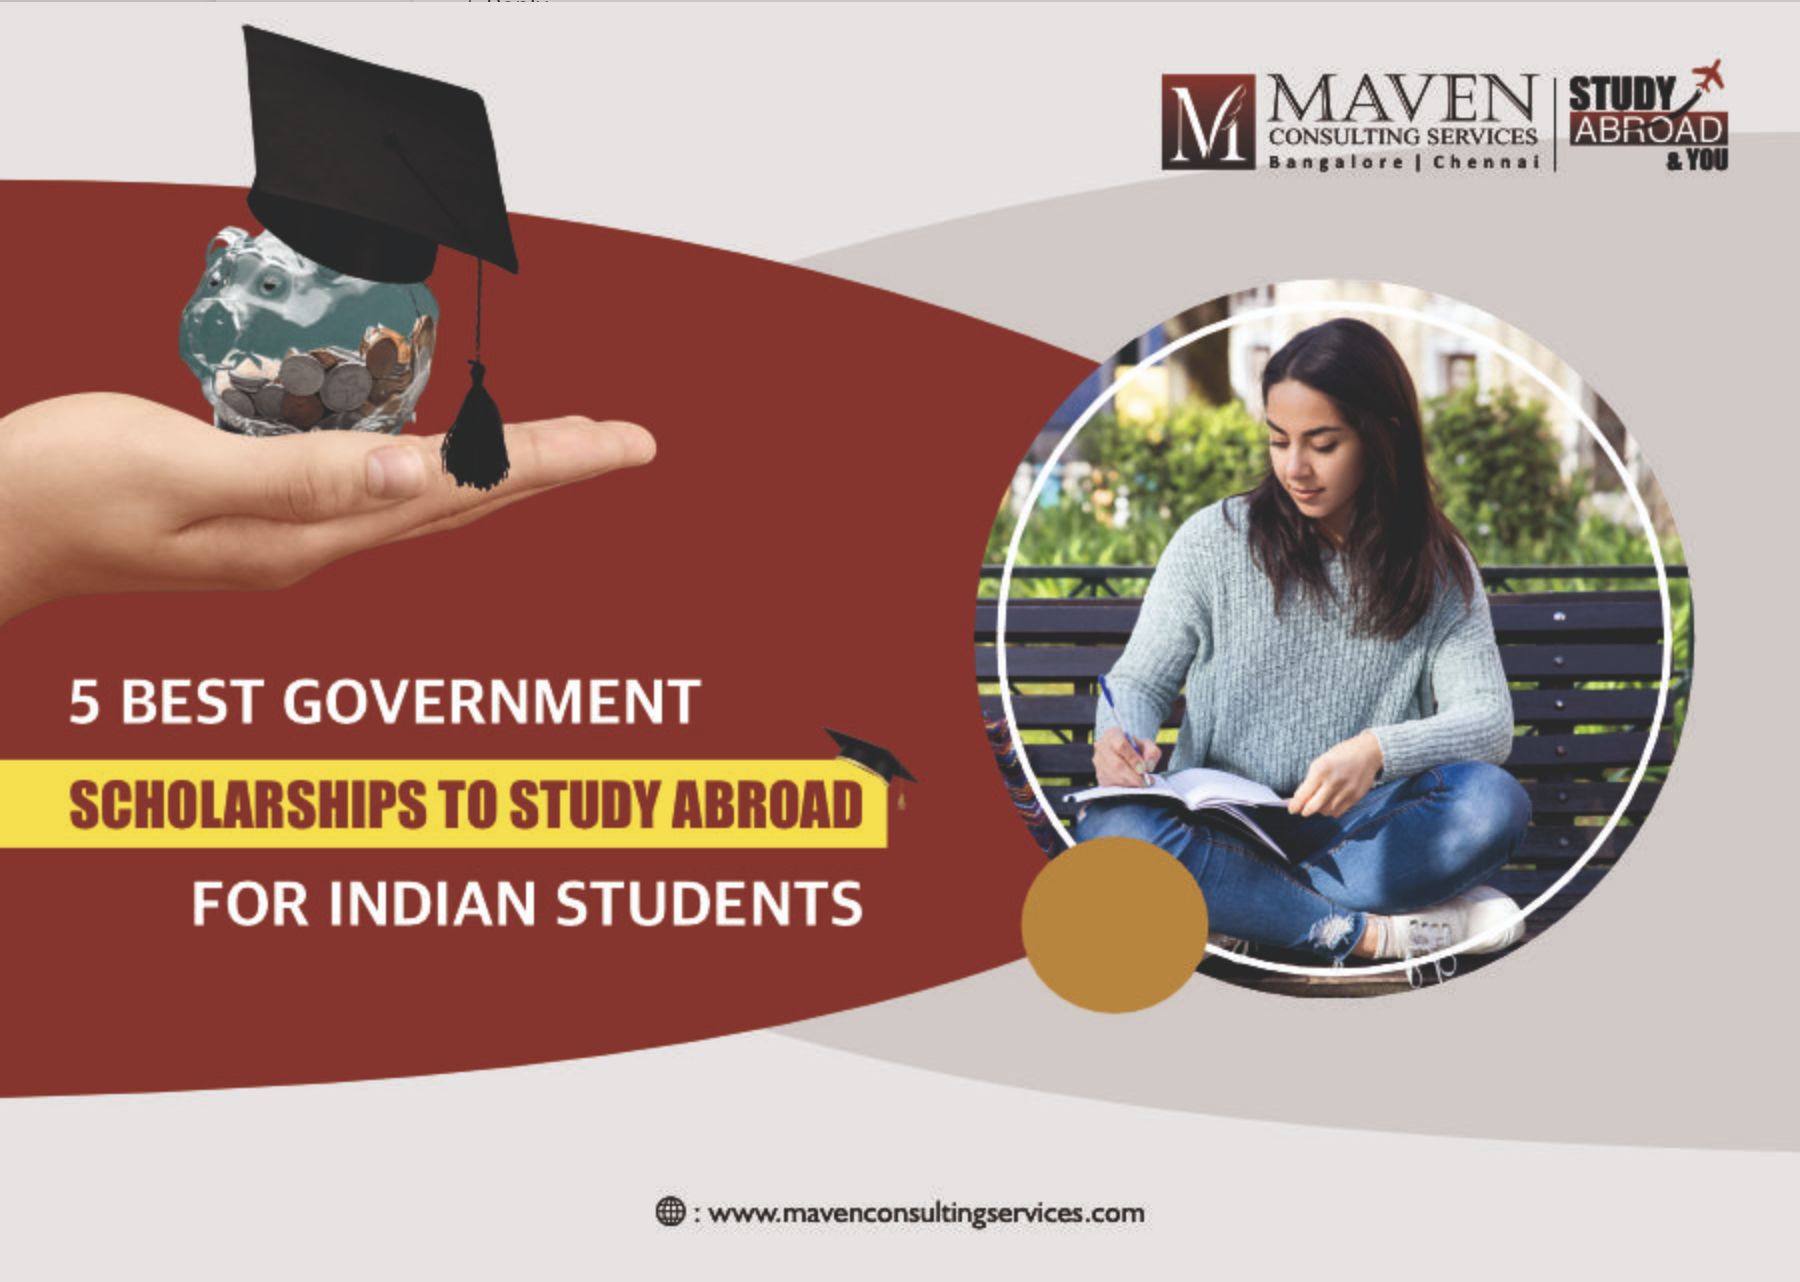 5 Best Government Scholarships To Study Abroad For Indian Students